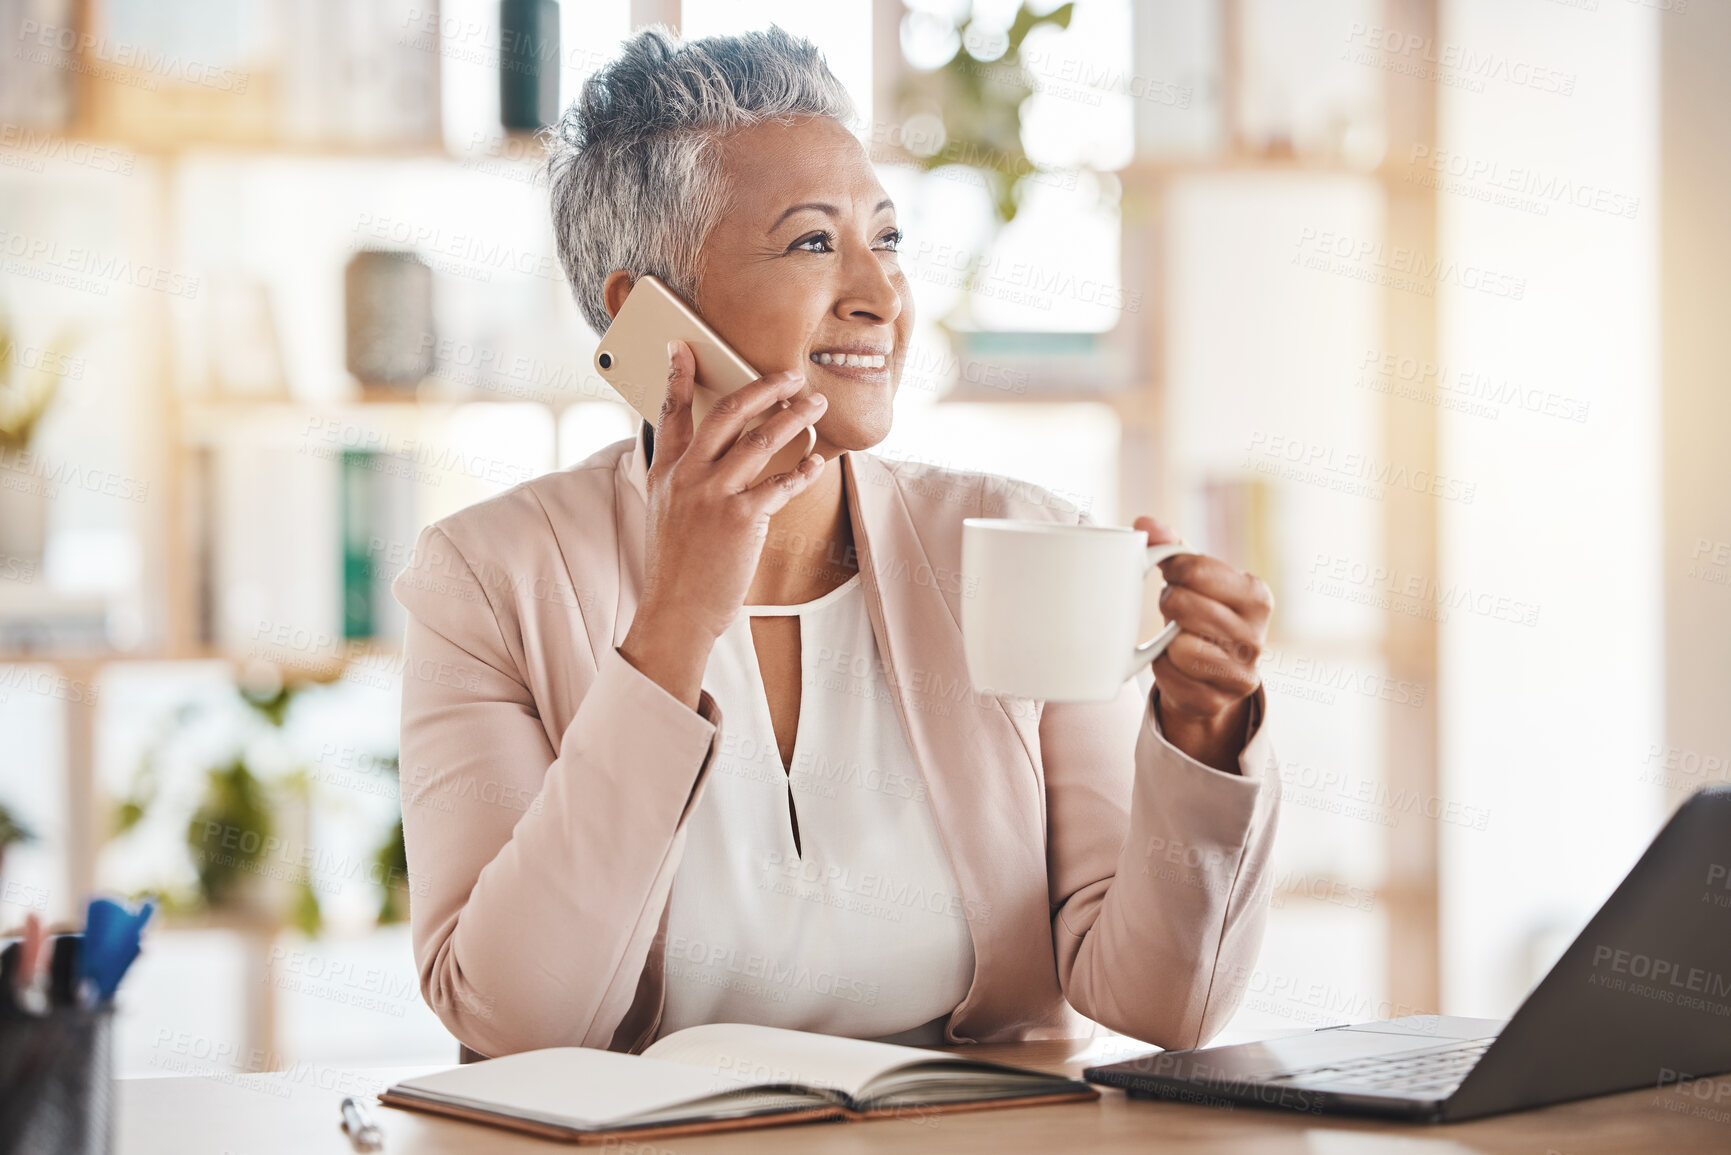 Buy stock photo Senior woman, phone call and coffee by laptop in communication, conversation or discussion at office desk. Elderly female on smartphone smiling with cup talking about business idea plan or networking